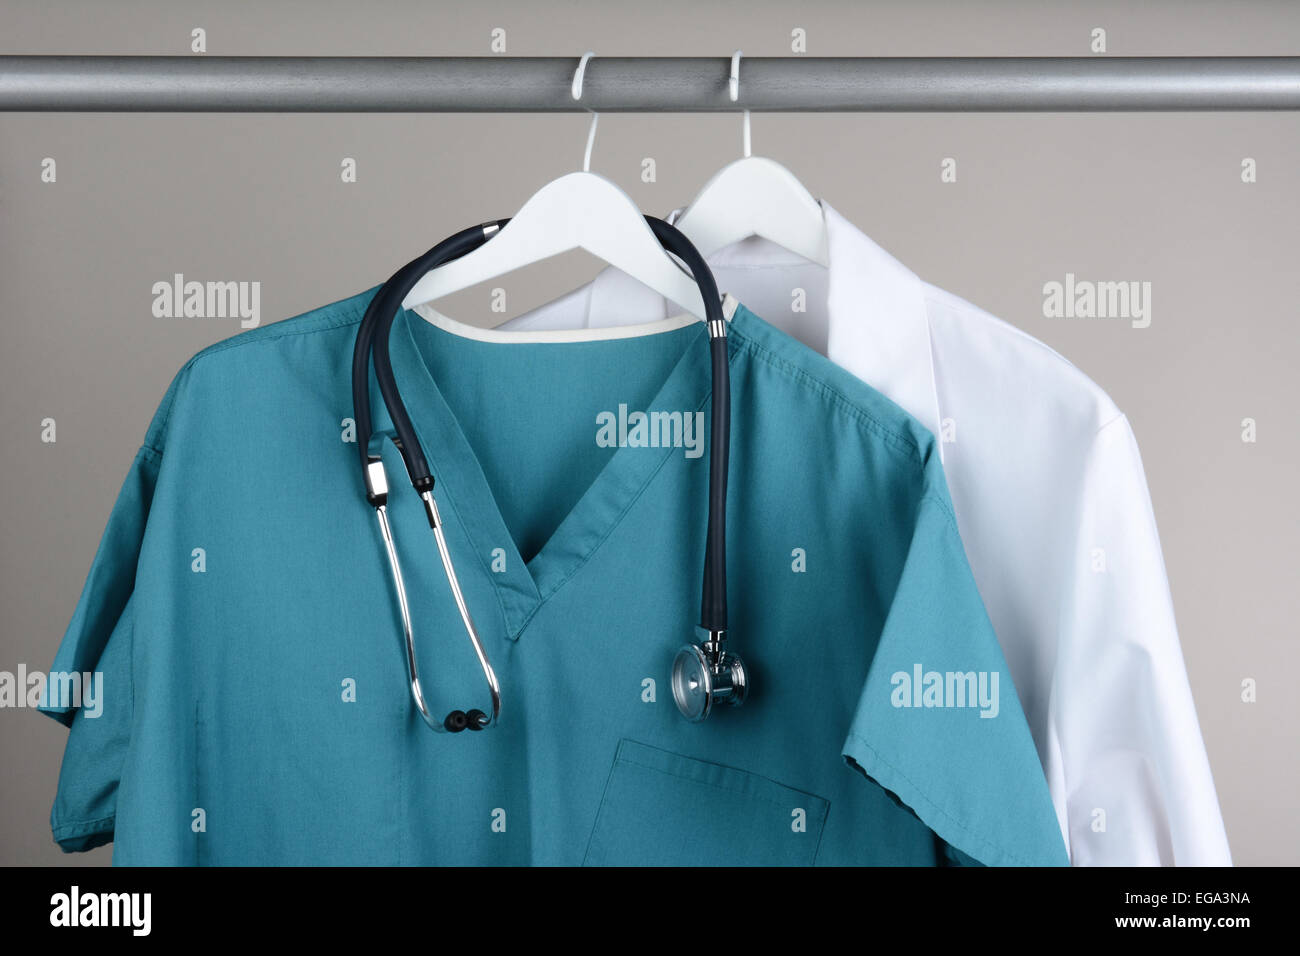 Closeup of a doctor's scrubs with stethoscope and lab coat on hangers against a neutral background. Green Scrubs and a white lab Stock Photo